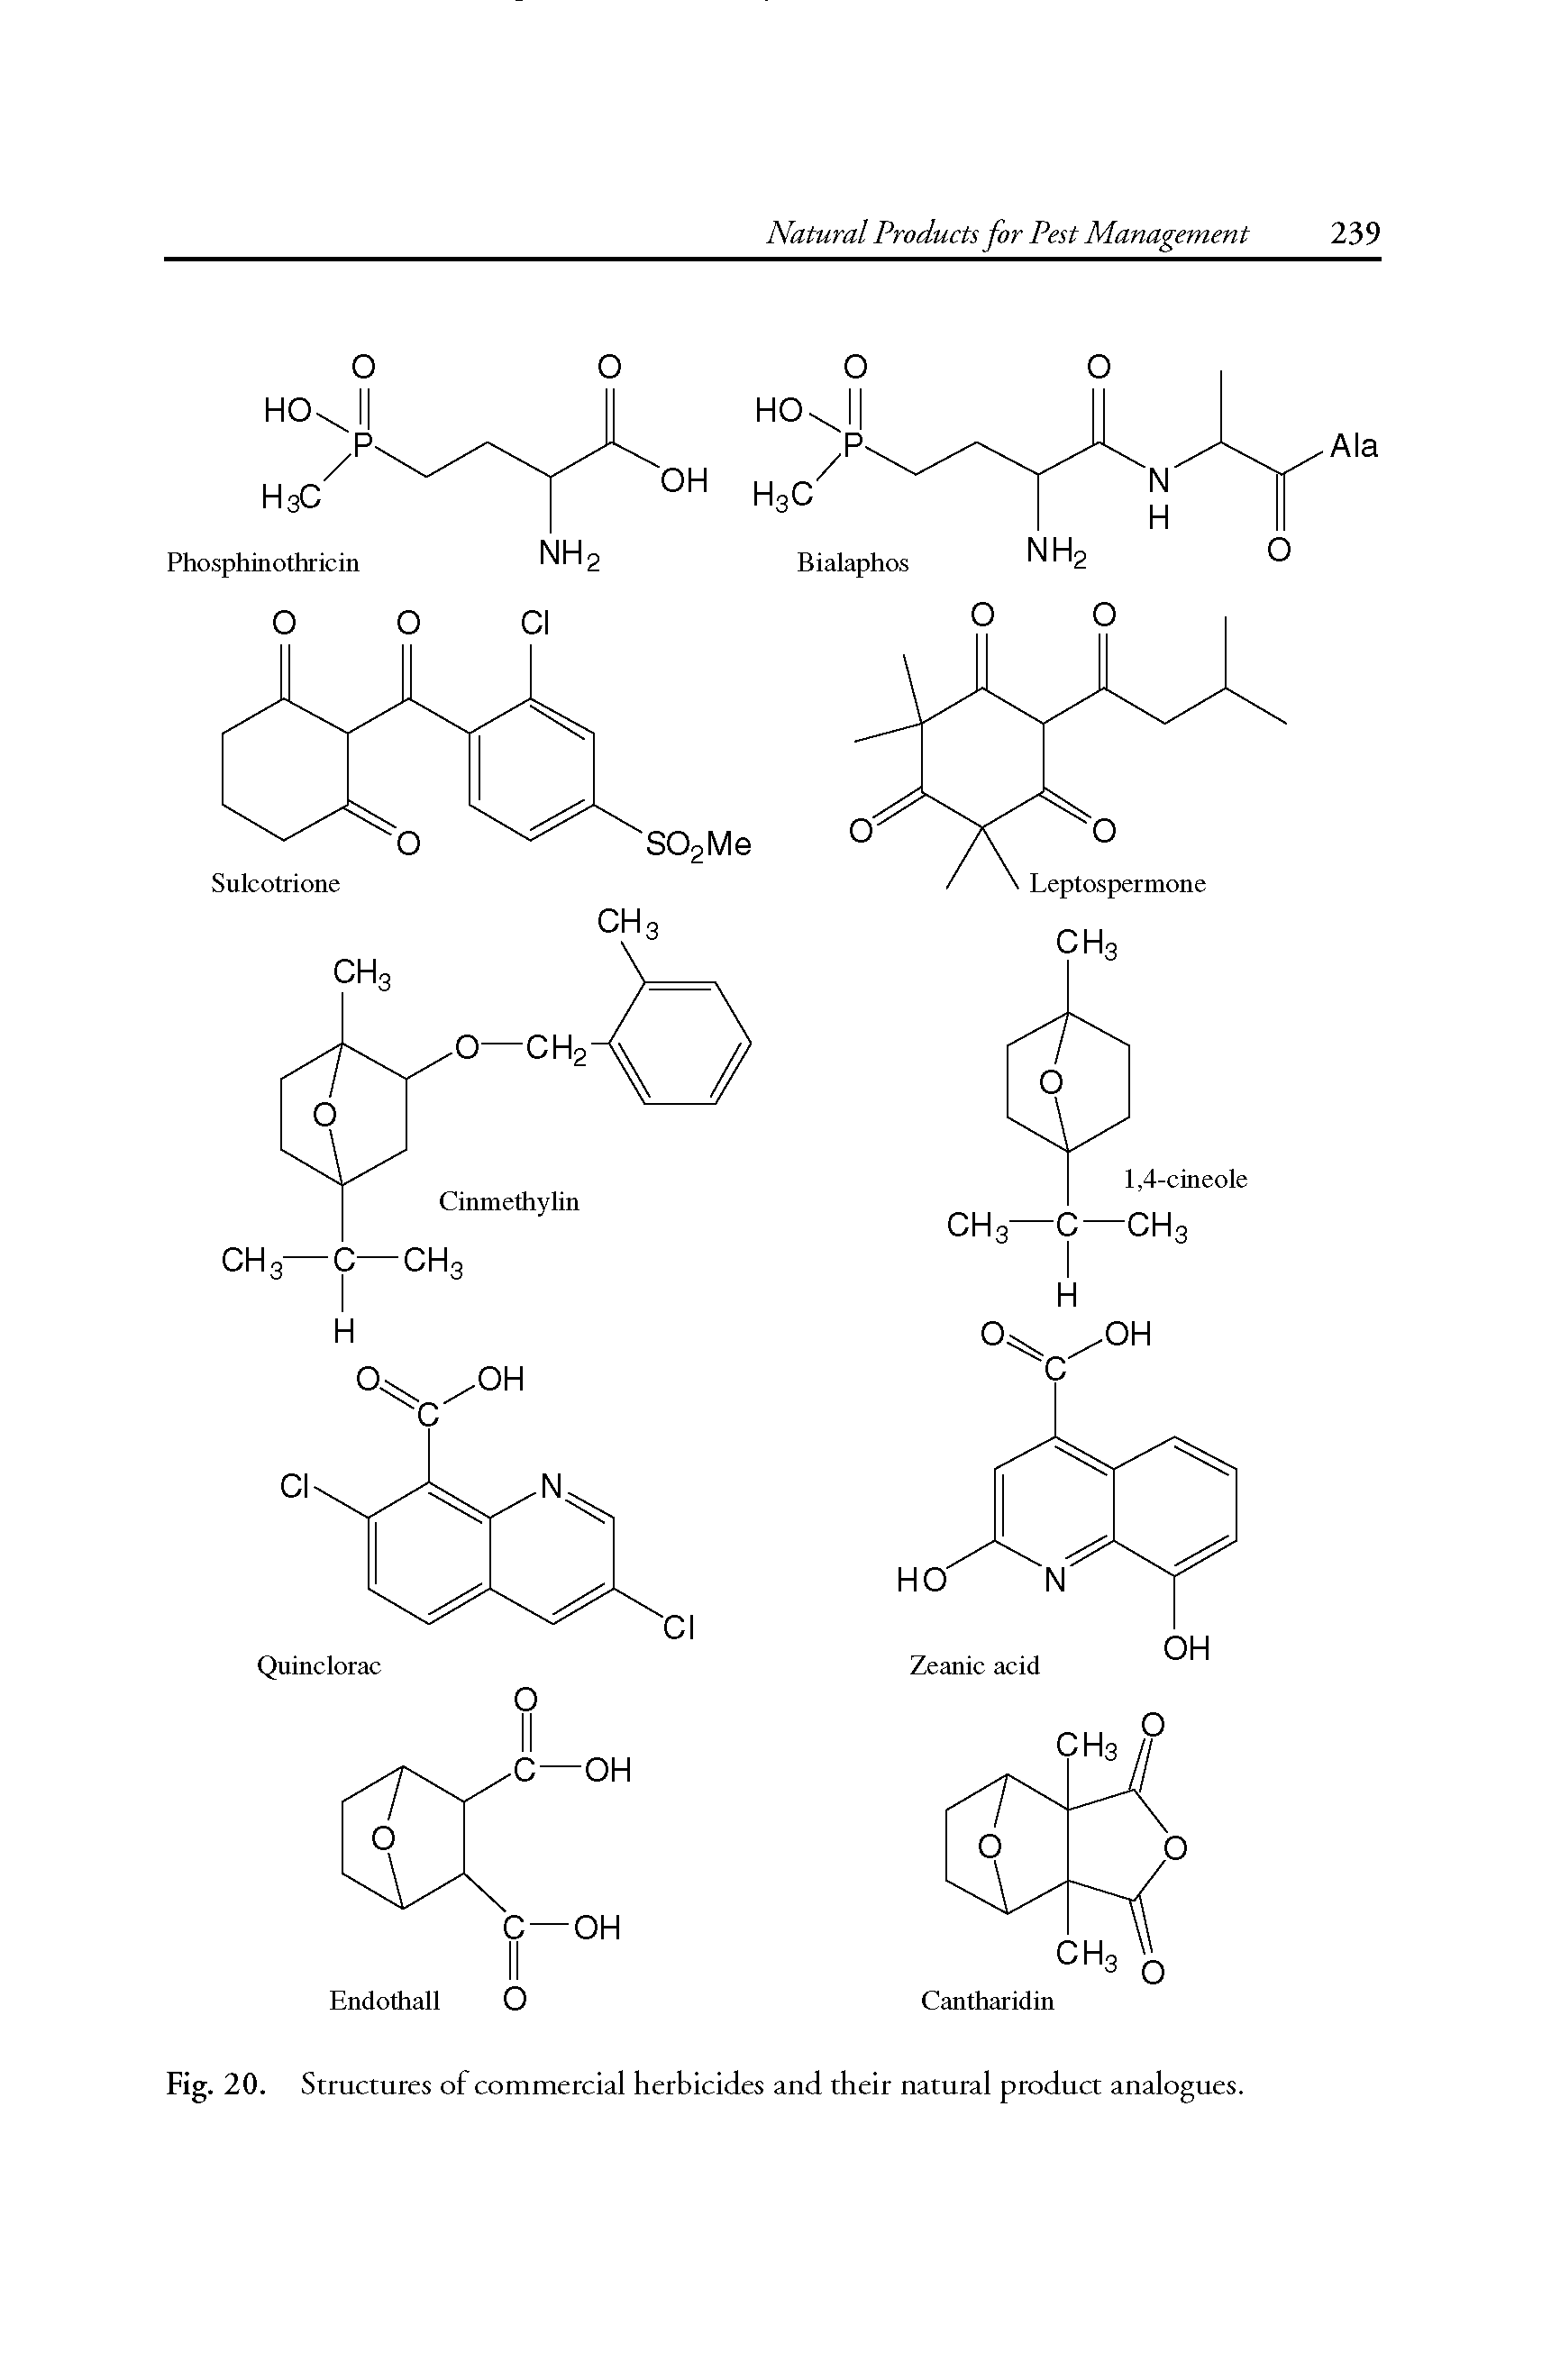 Fig. 20. Structures of commercial herbicides and their natural product analogues.